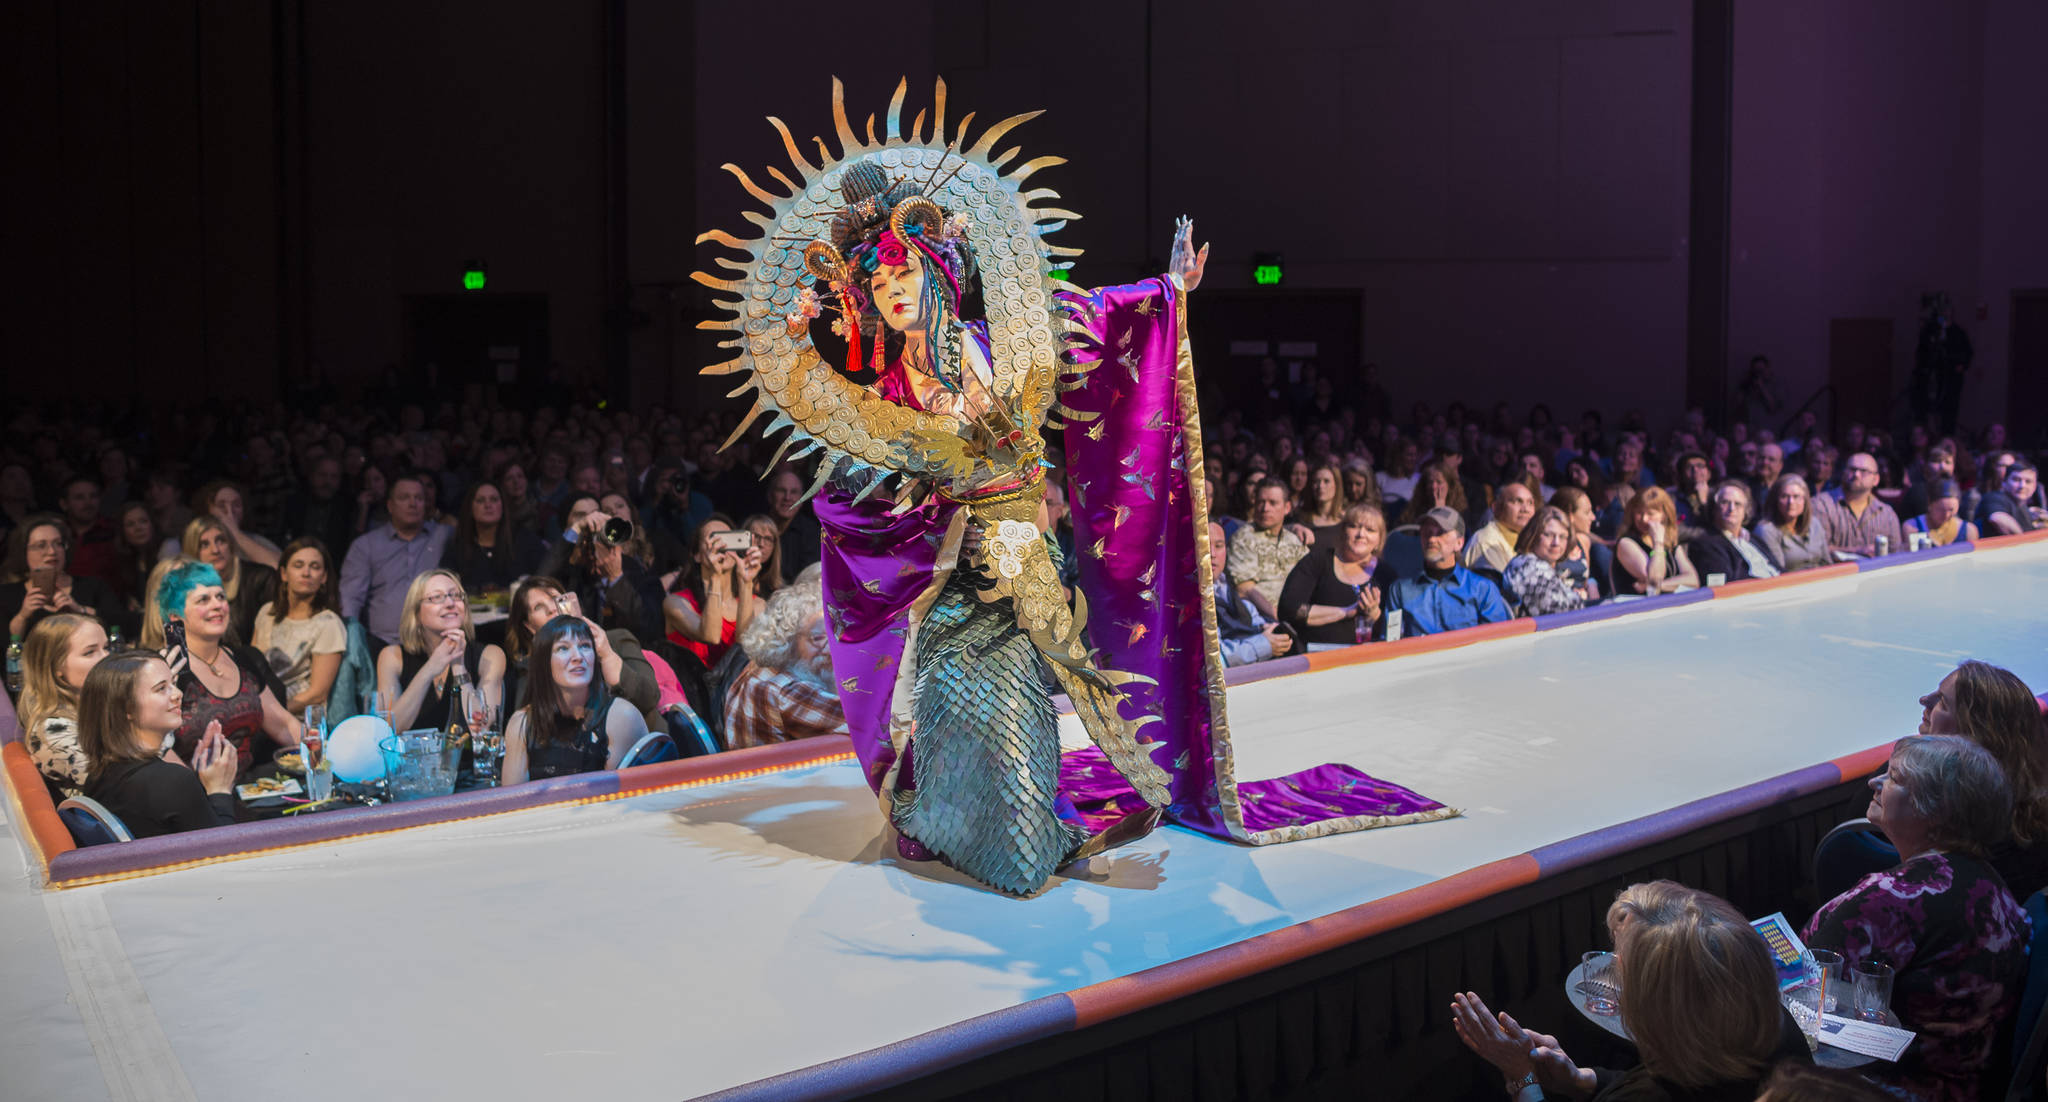 “Doragon” by Beth Bolander, modeled by Dani Gross, at the Wearable Art Show at Centennial Hall on Saturday, Feb. 17, 2018. Doragon placed third in the Juror’s Best in Show. (Michael Penn | Juneau Empire)